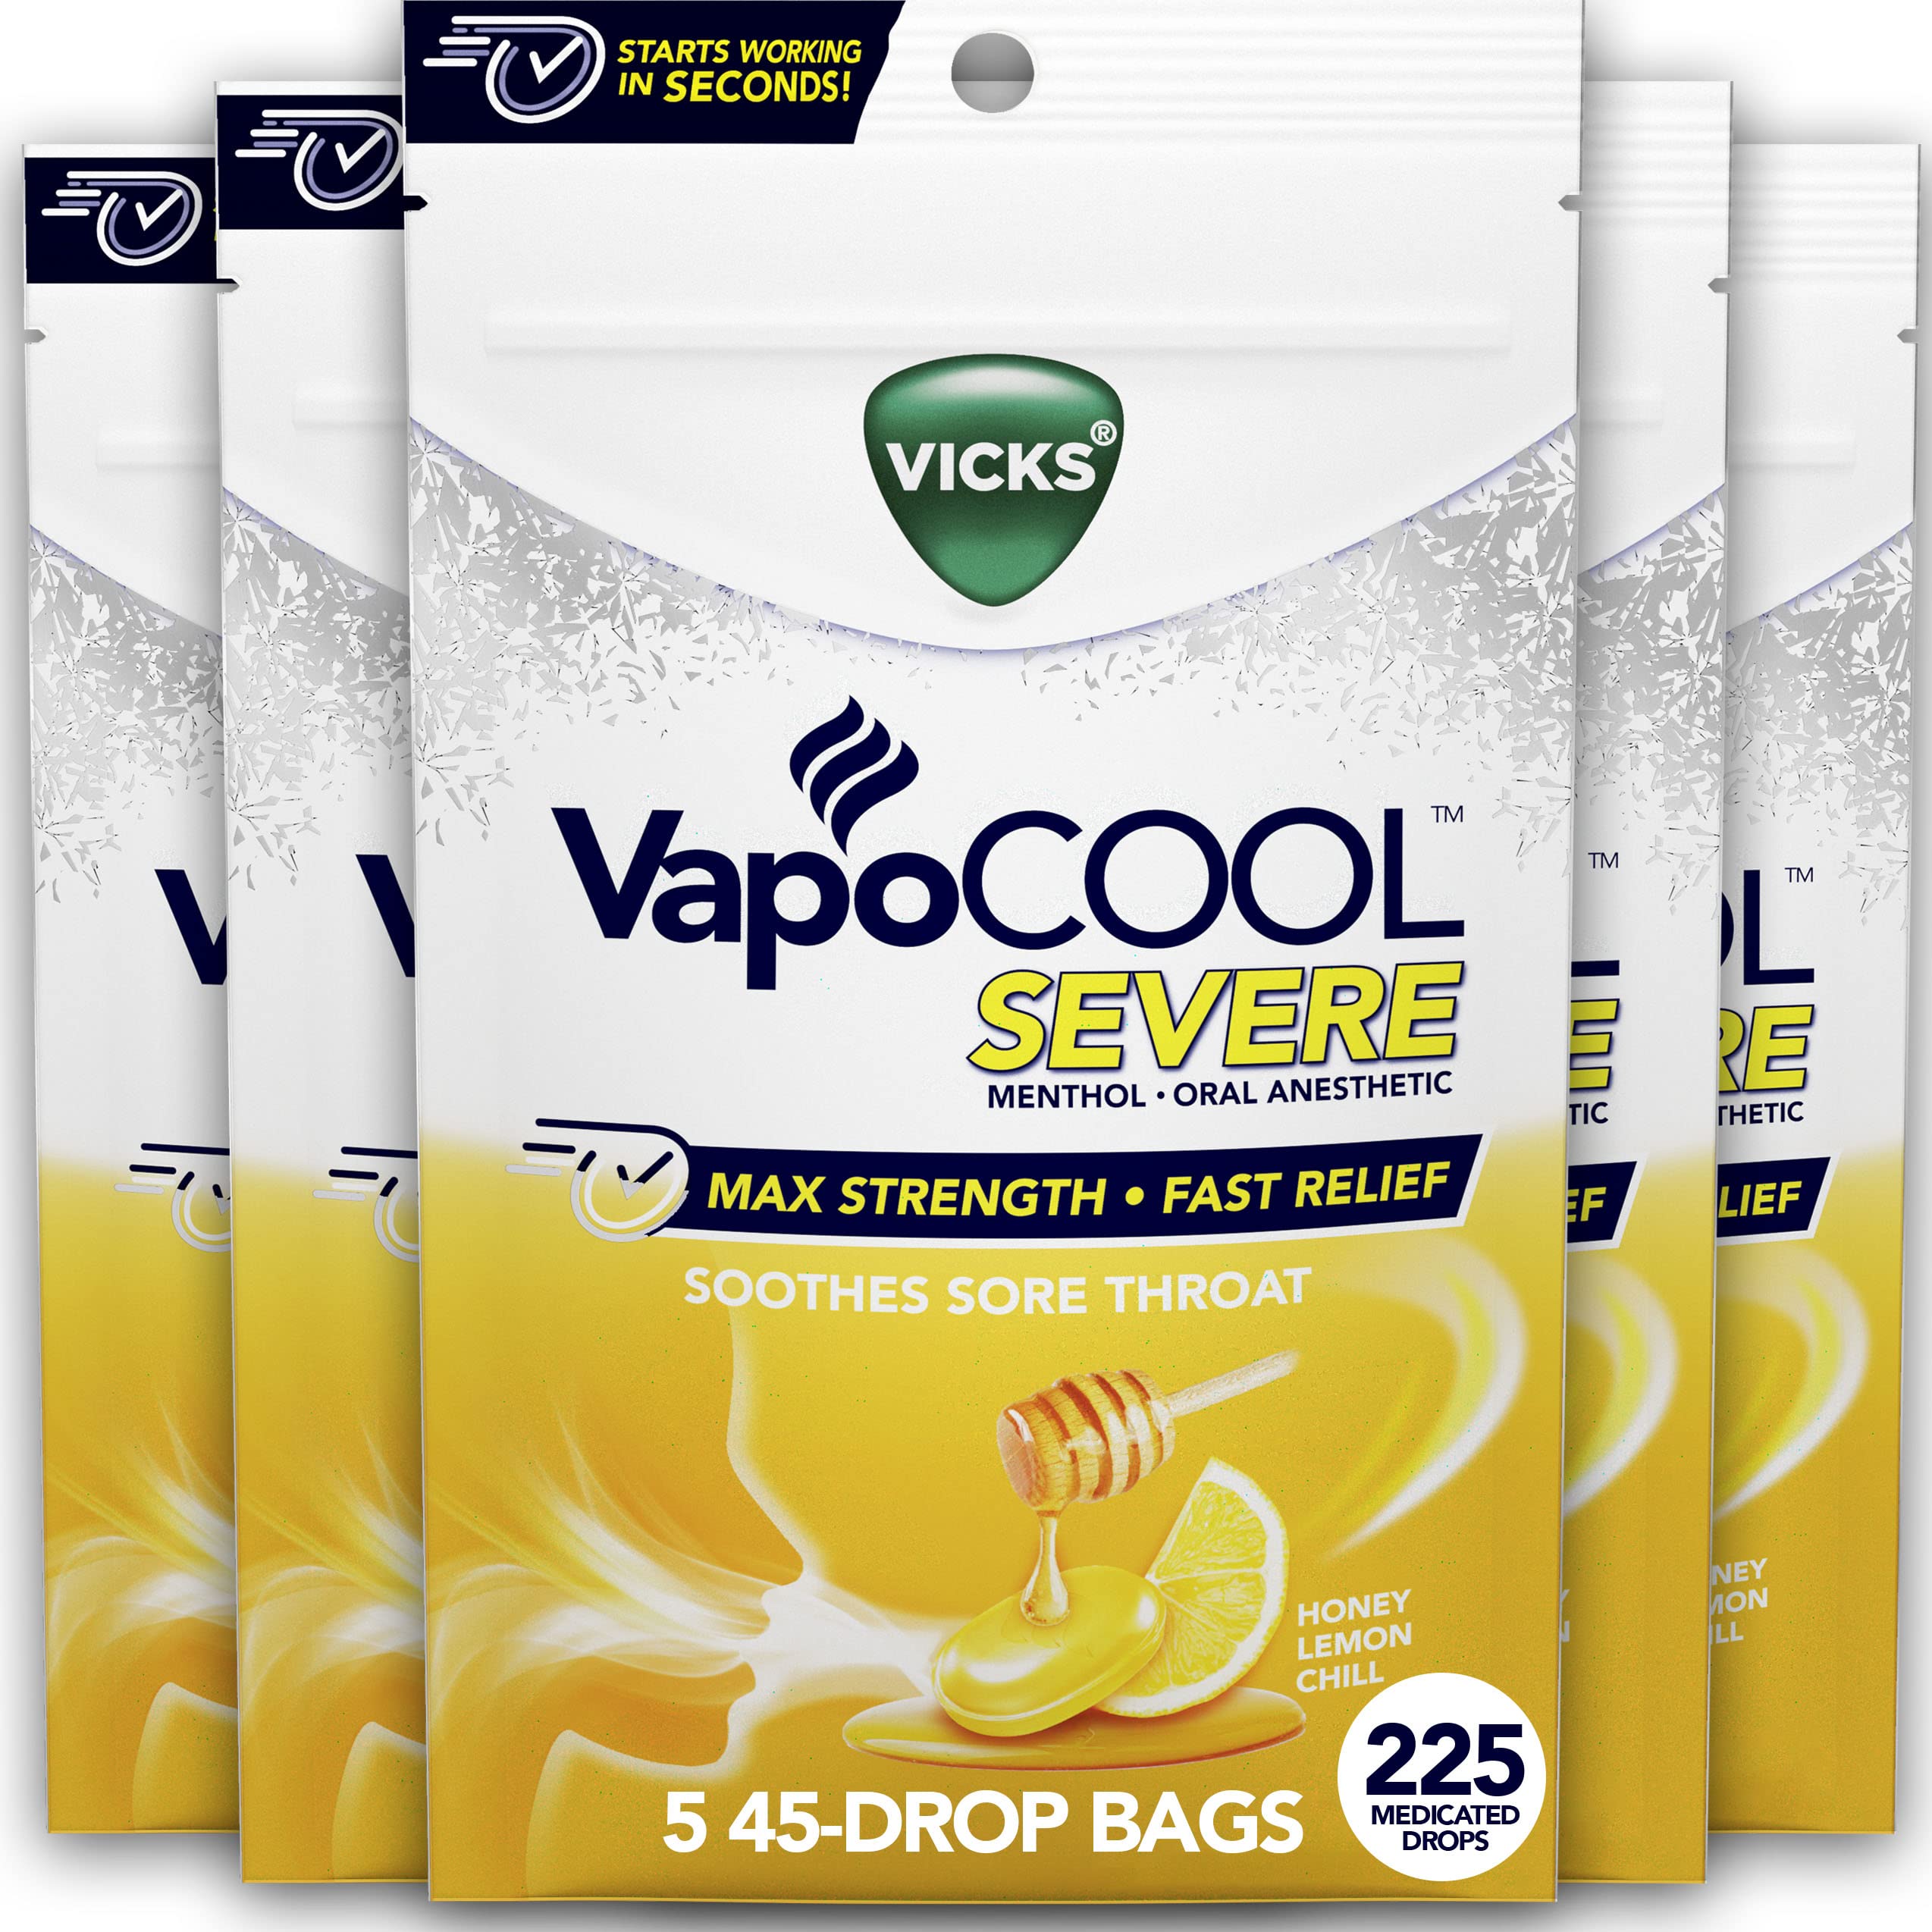 Vicks VapoCOOL Severe, Medicated Drops, Menthol Soothes Sore Throat Pain Caused by Cough, Honey Lemon Chill Flavor, 225 Drops (5 Packs of 45)